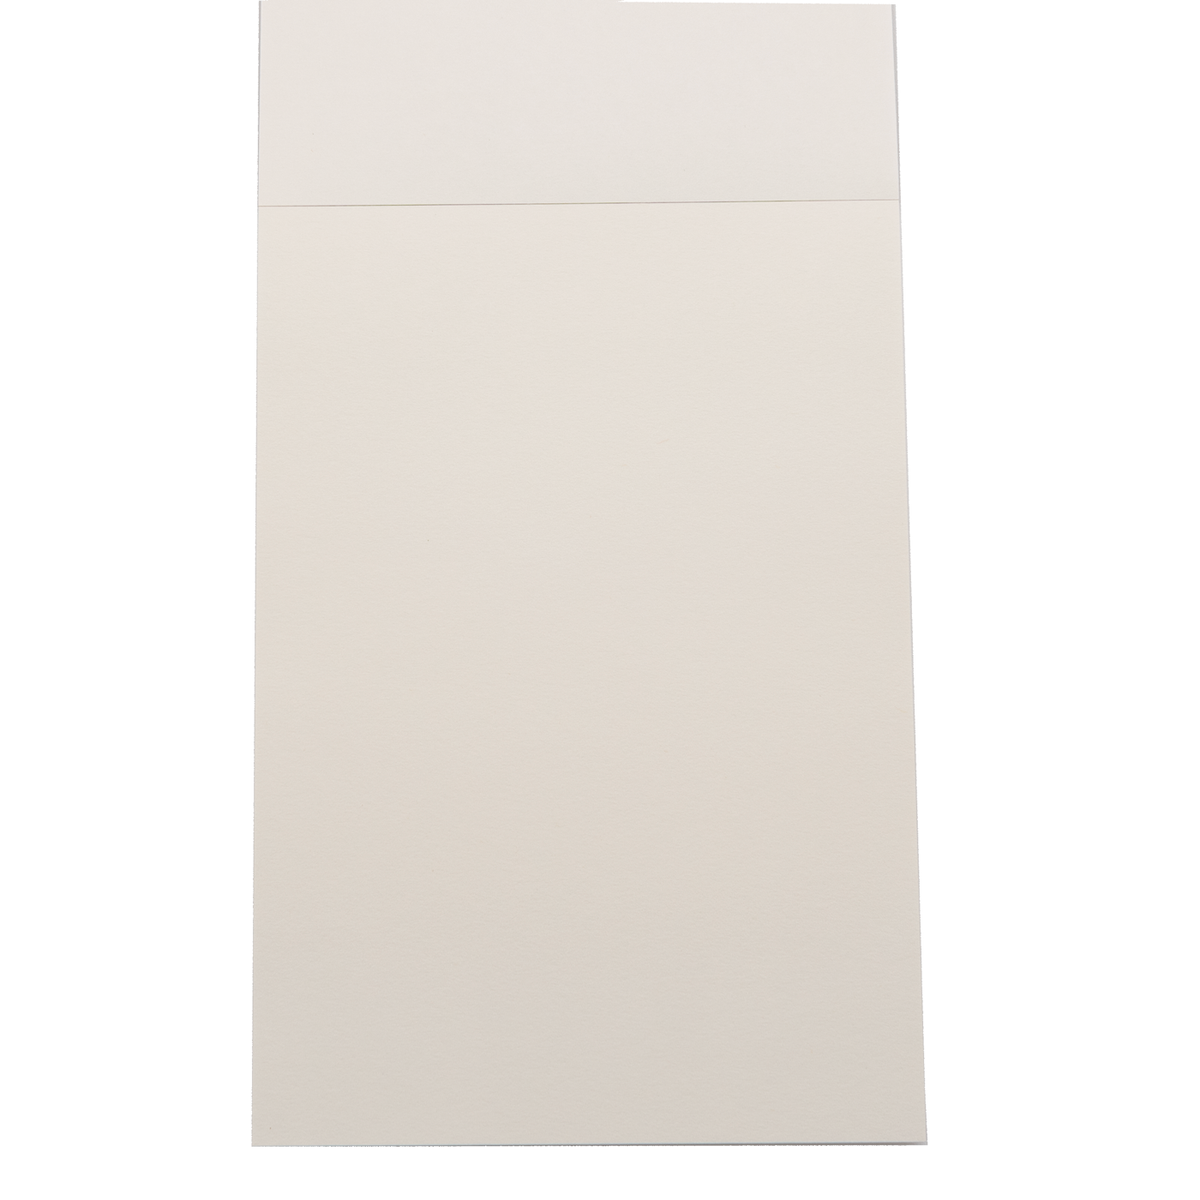 Wearingeul Nobile No.1 Paper Pad A5 Blank